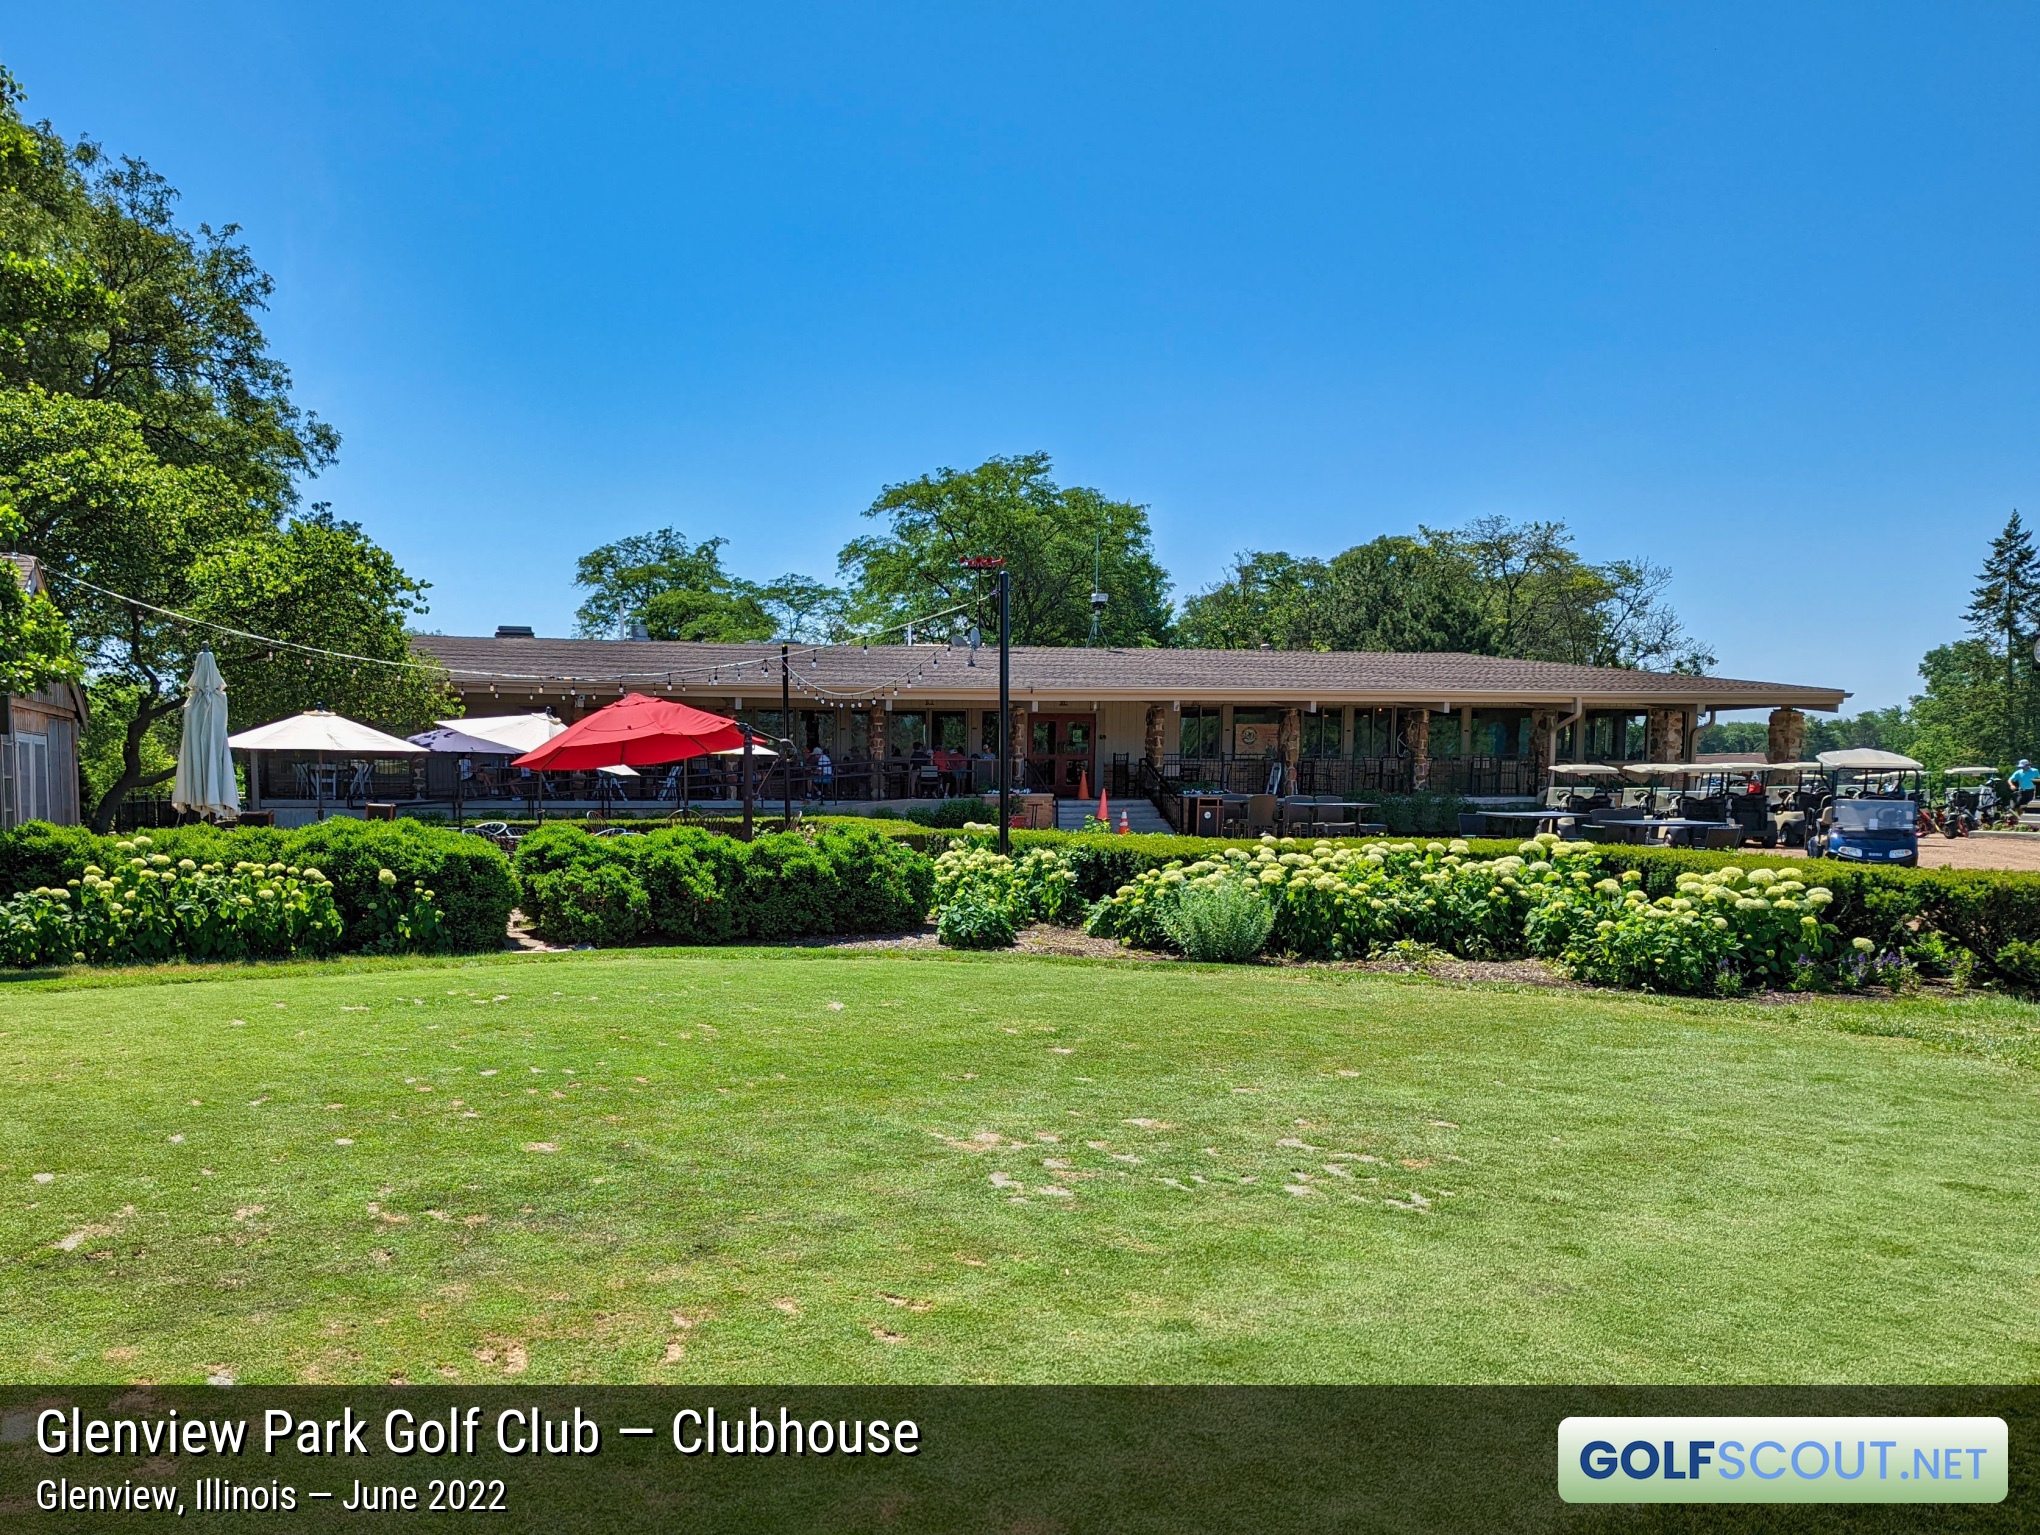 Photo of the clubhouse at Glenview Park Golf Club in Glenview, Illinois. 